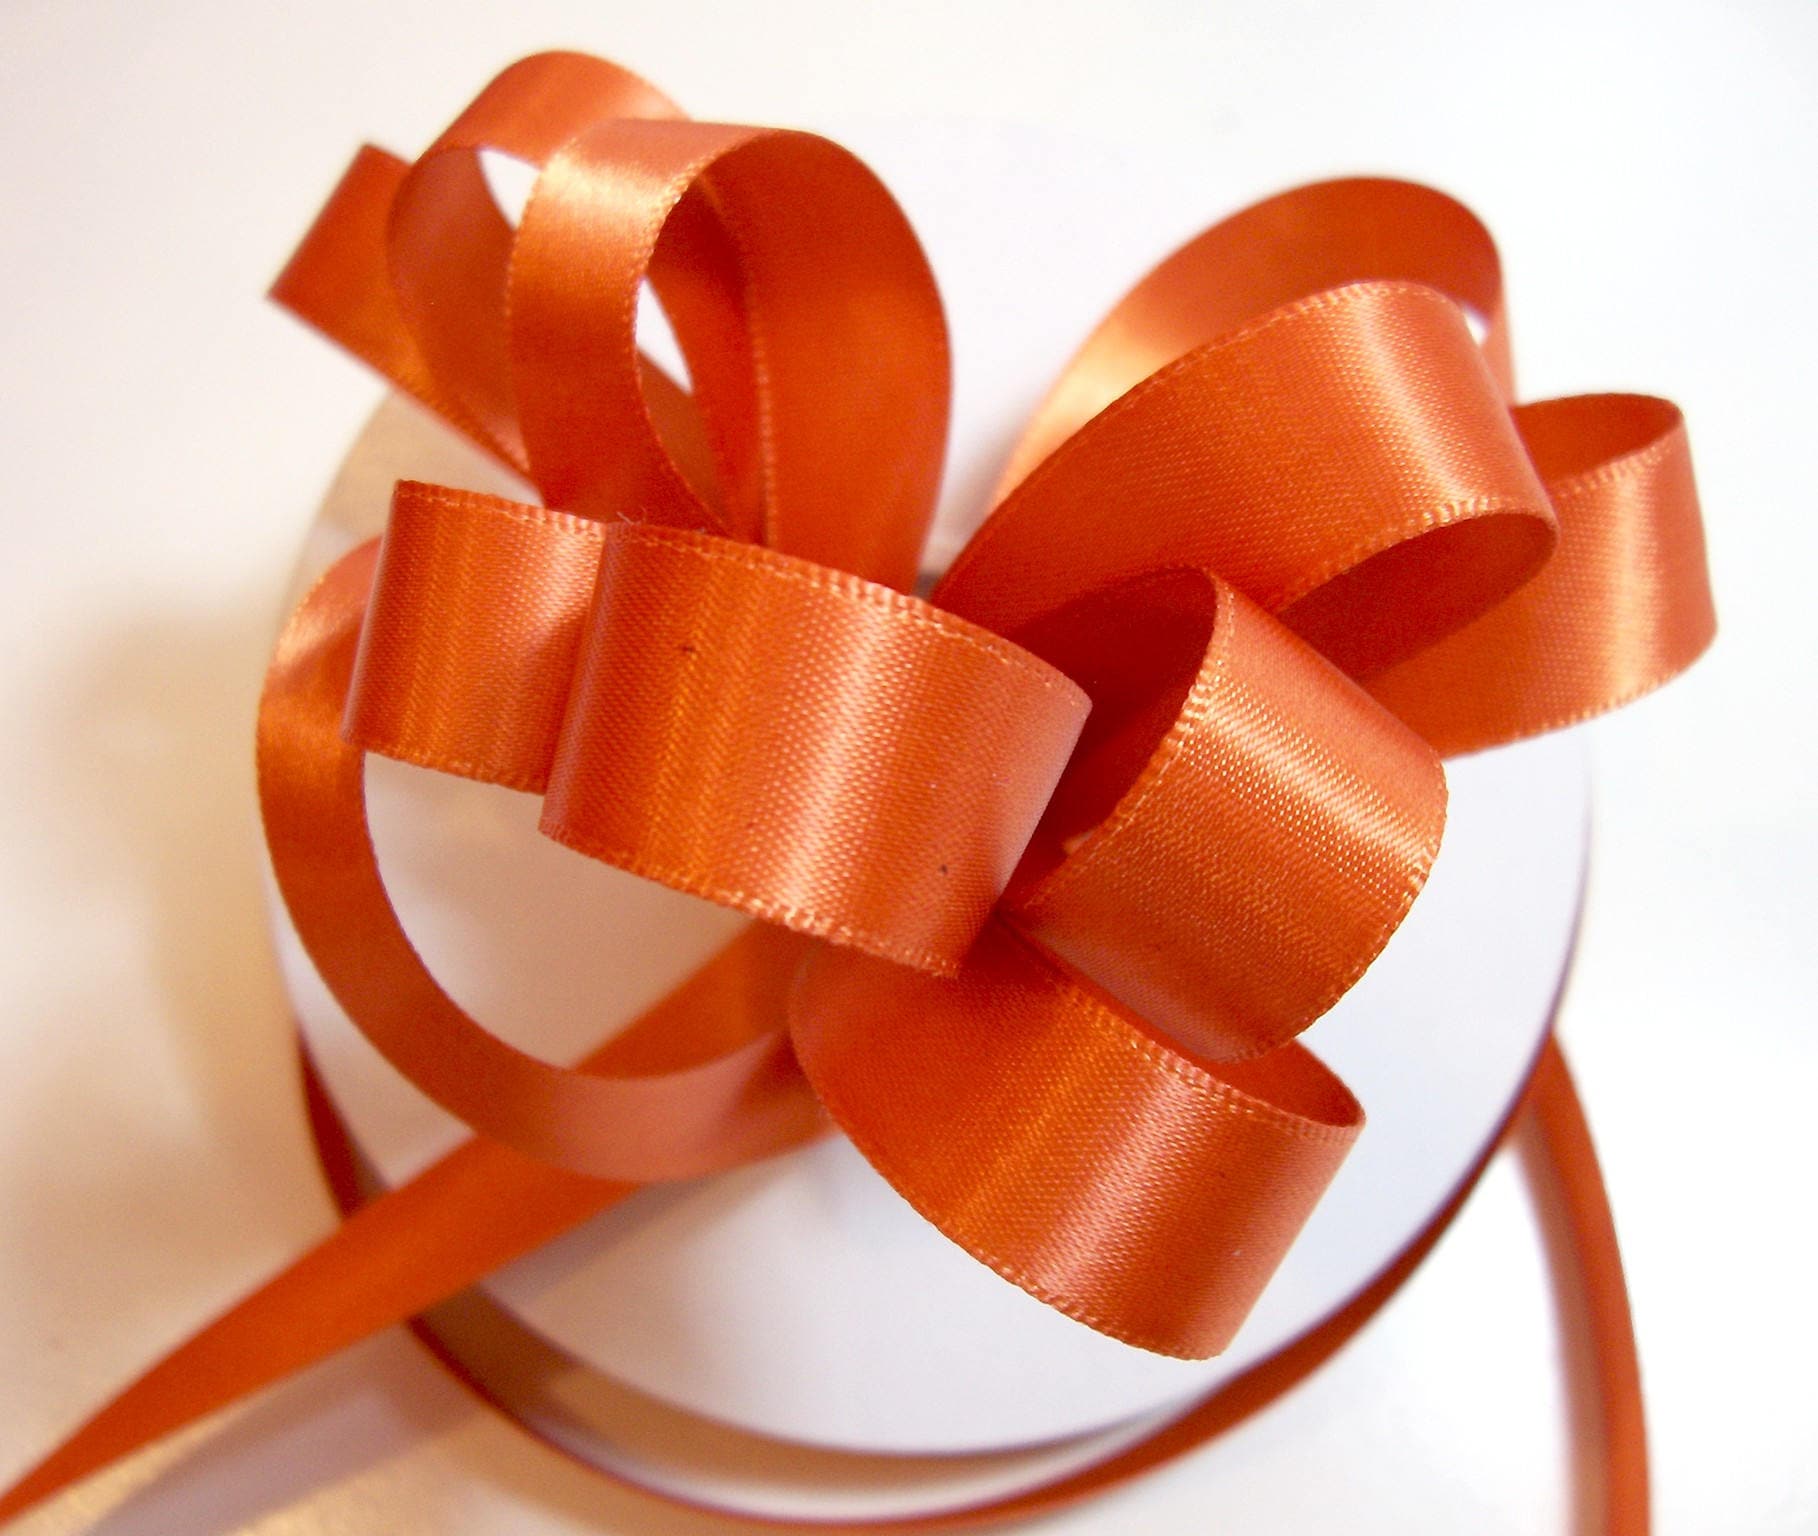 Offray Ribbon, Blush 1 1/2 Inch Double Face Satin Ribbon for Crafting,  Sewing, Gift Wrapping, Decorating, 50yd, 1 Each 